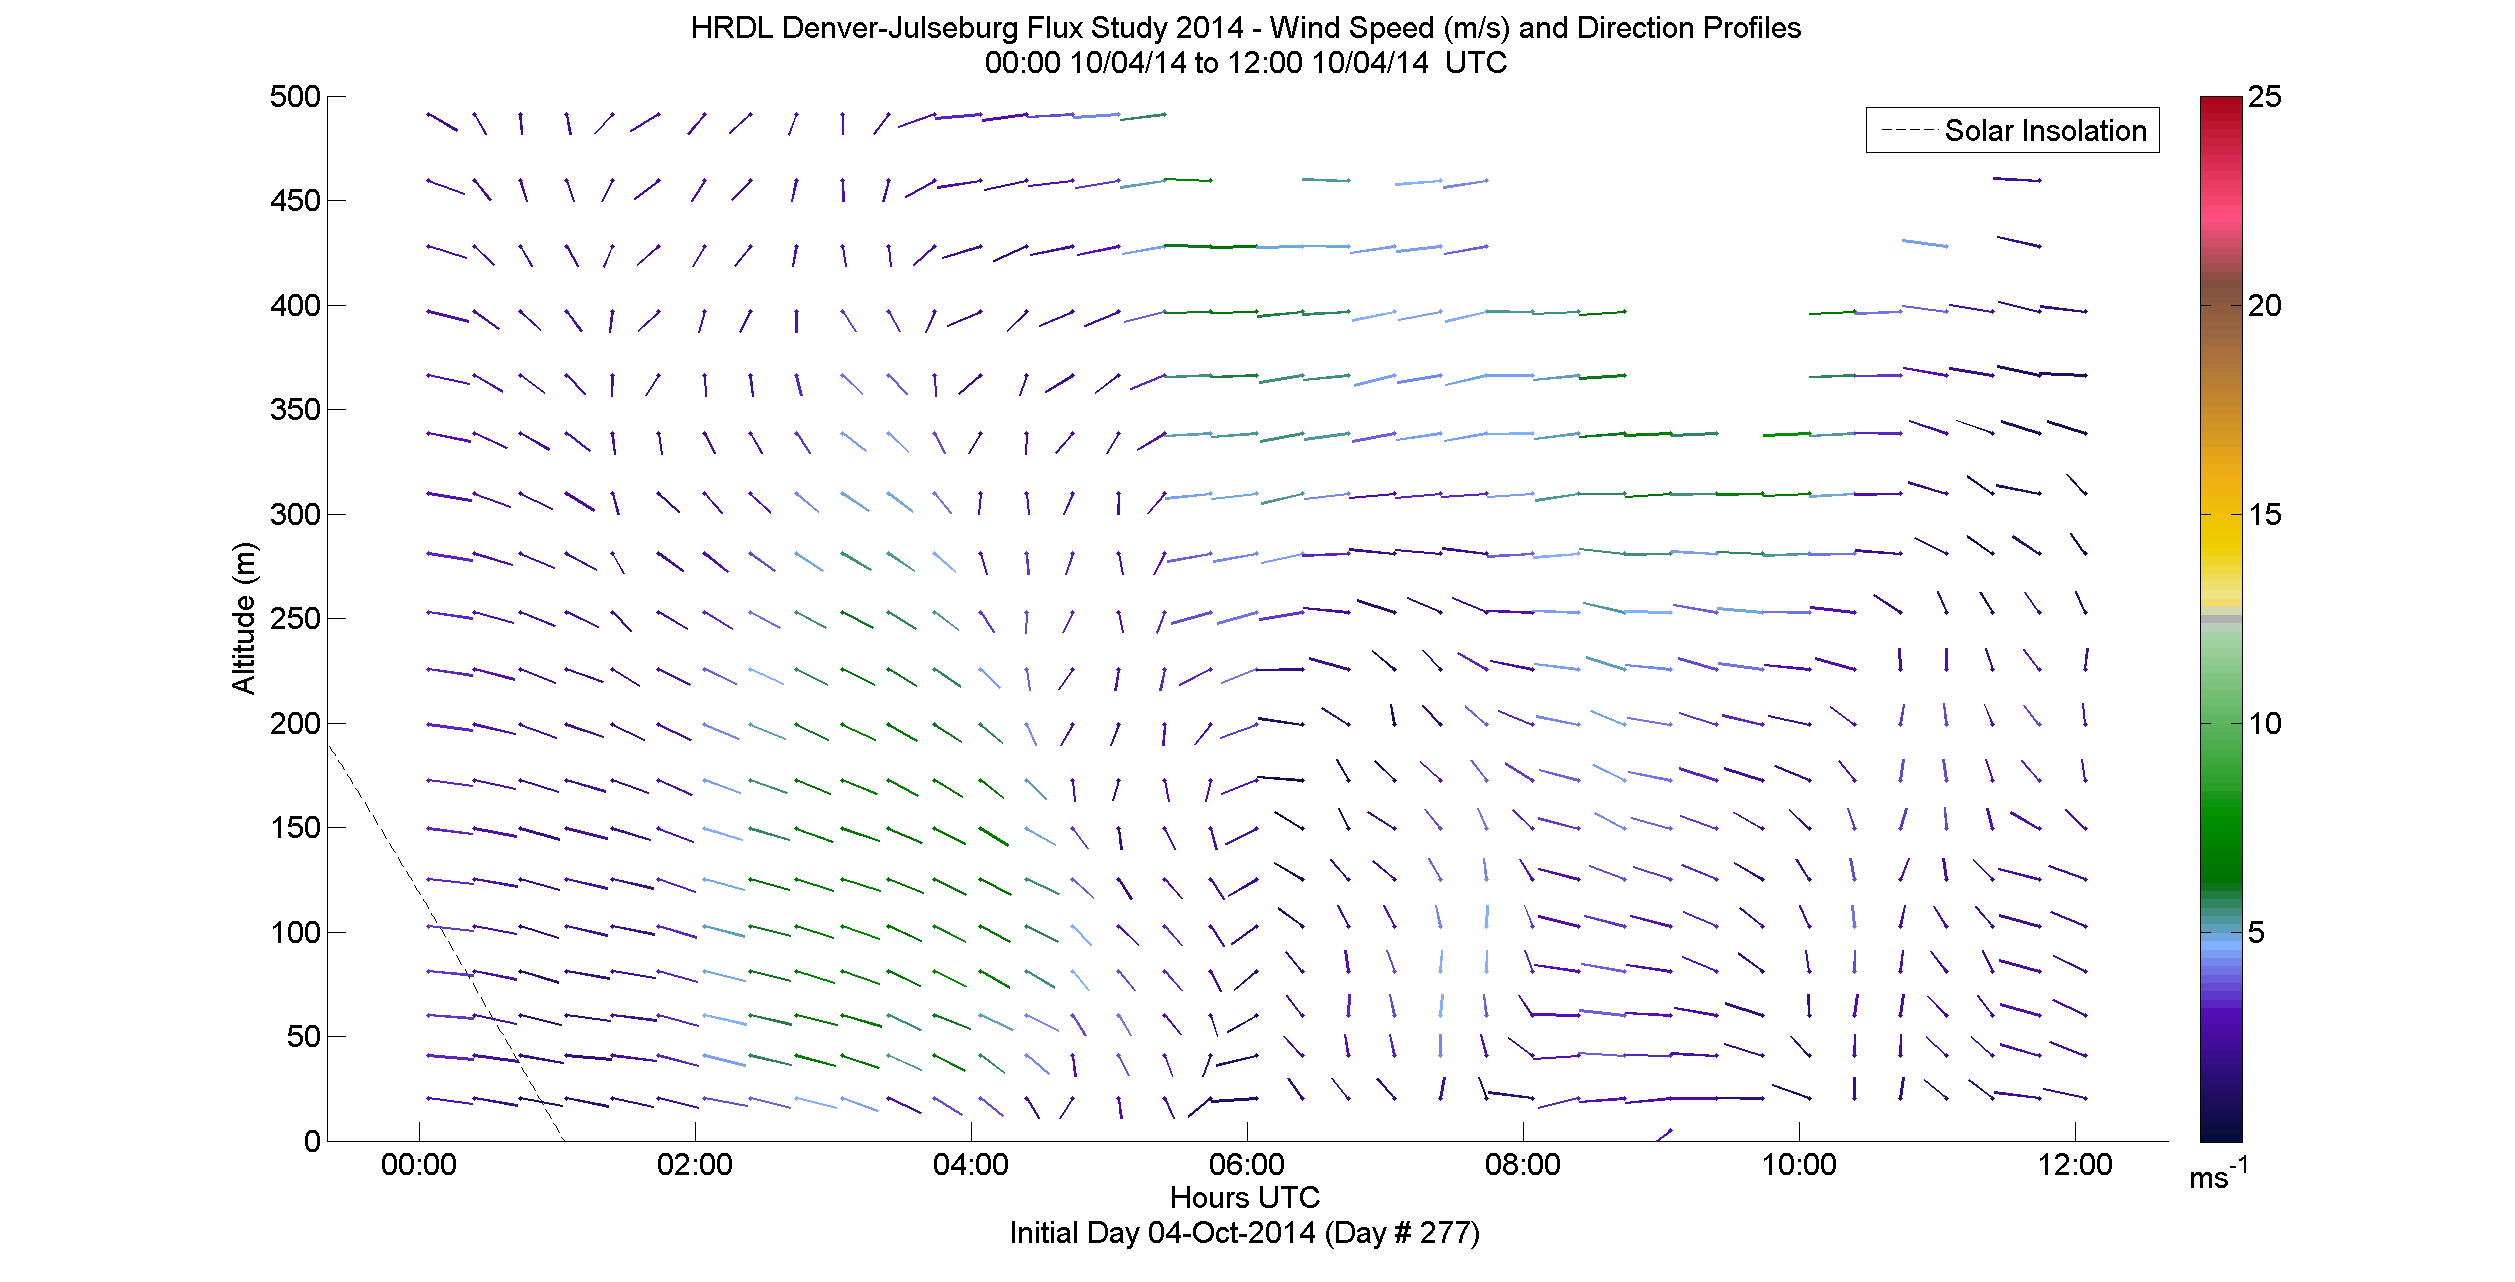 HRDL speed and direction profile - October 4 am